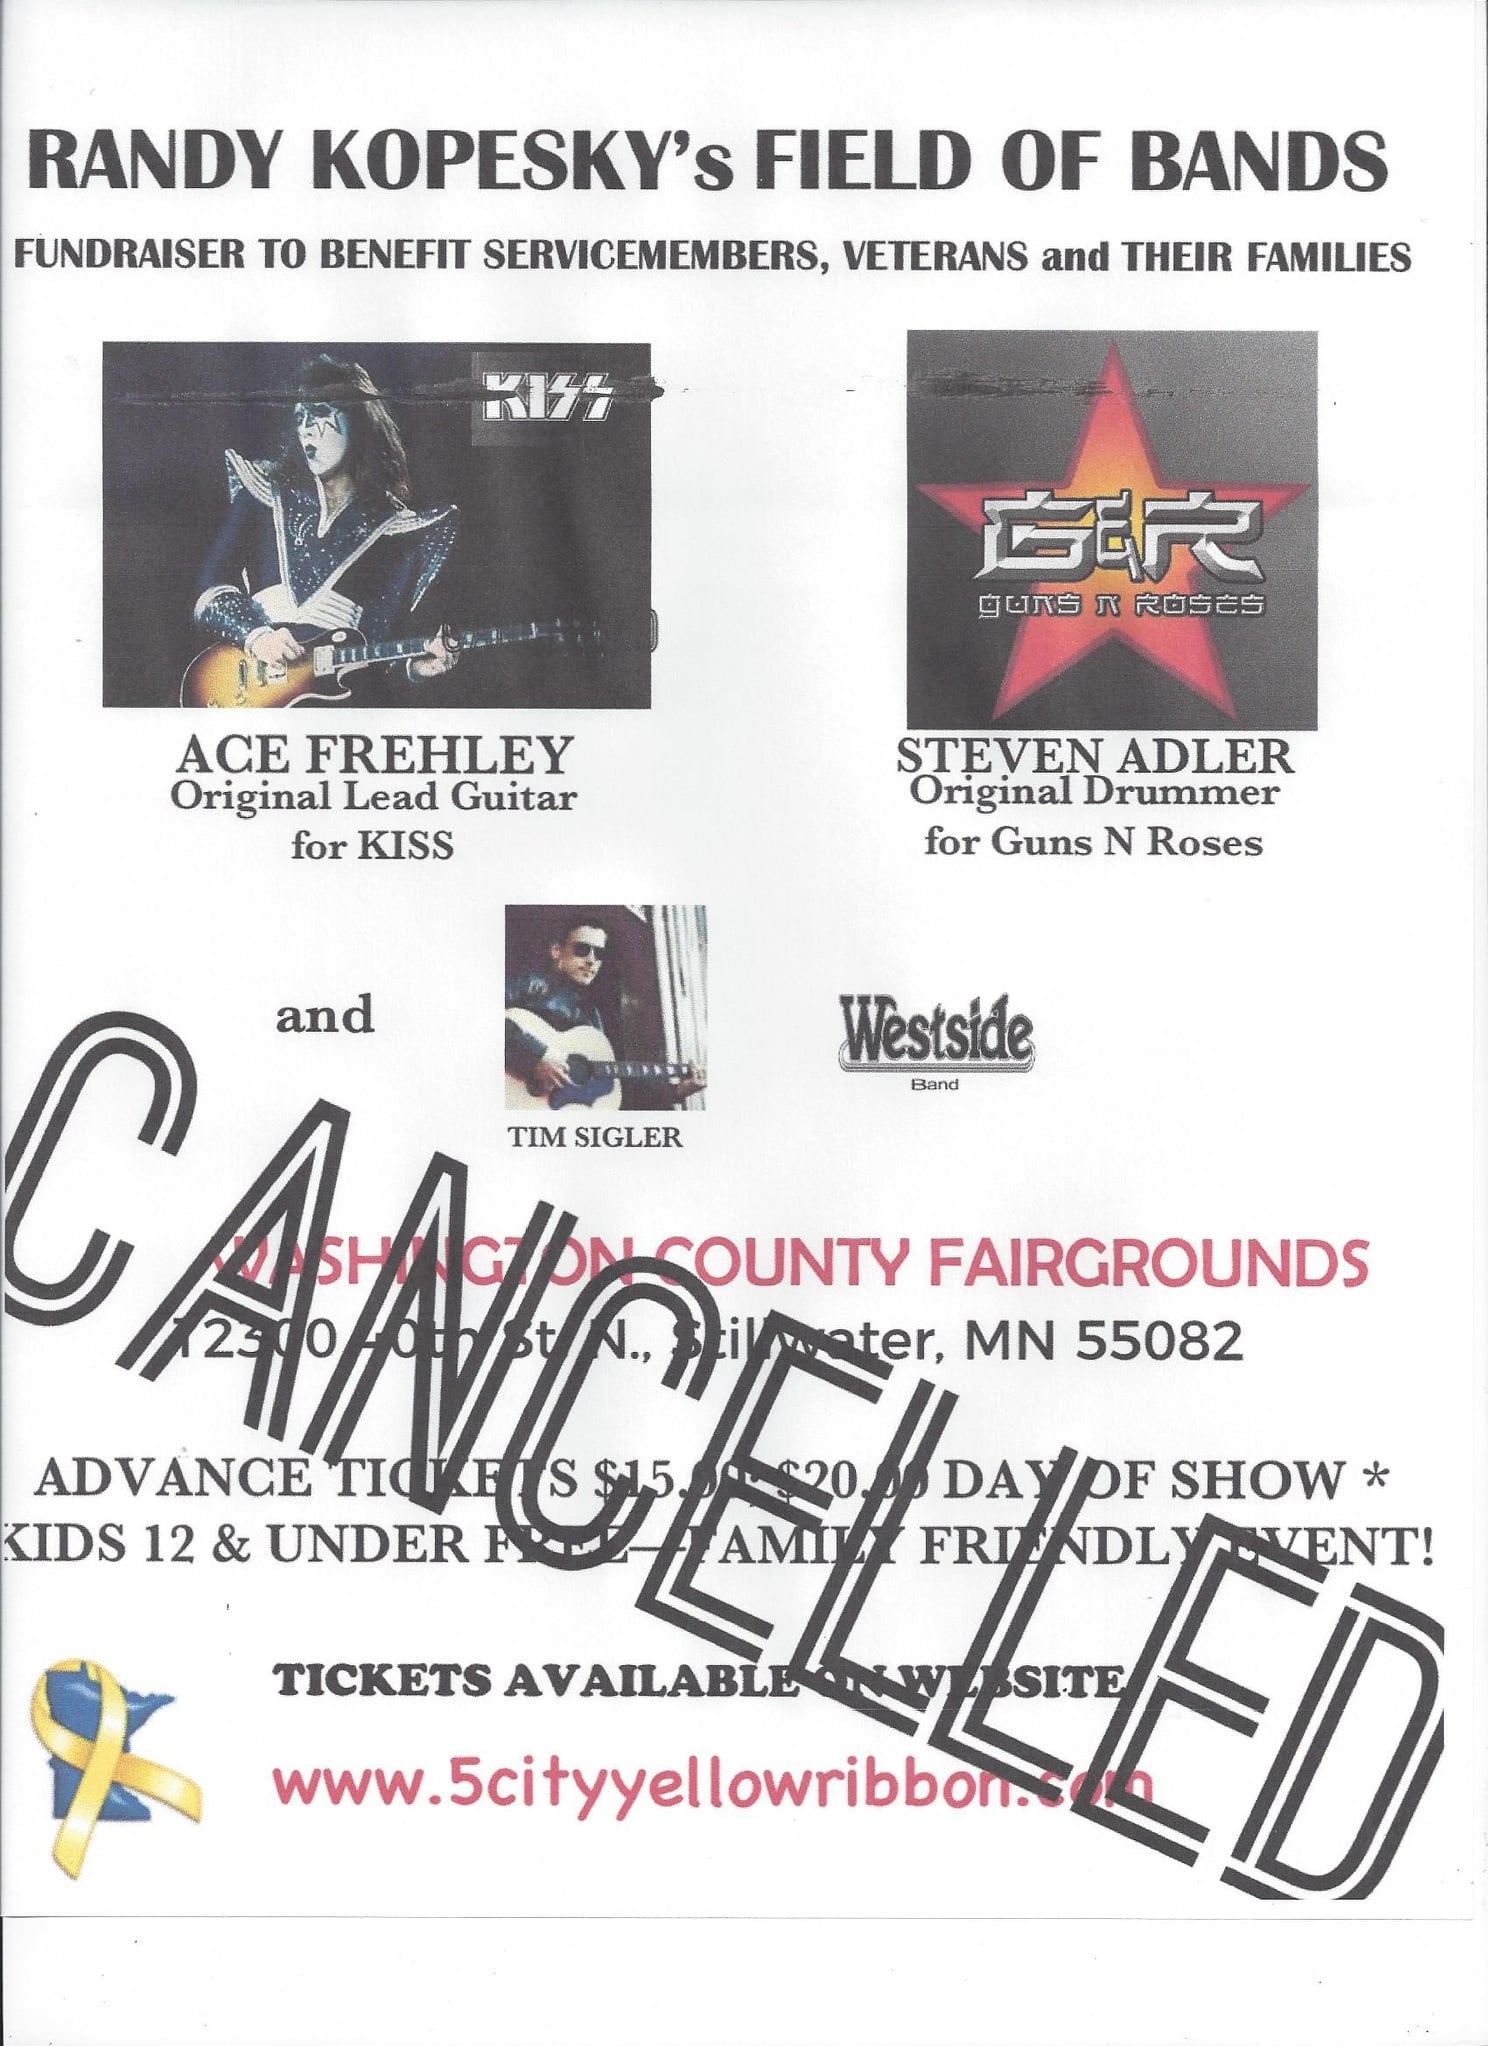 Cancelled event